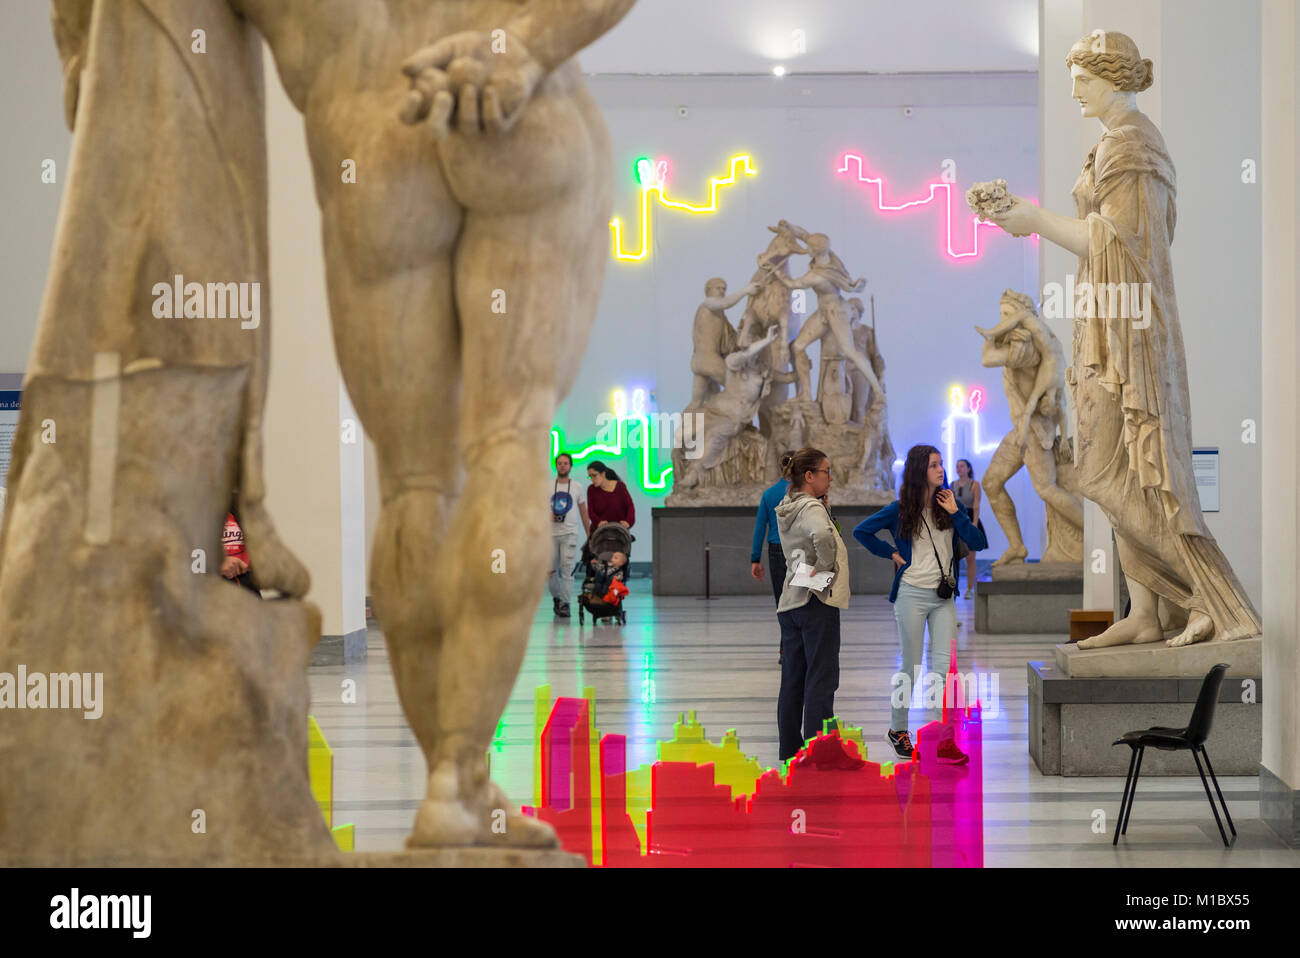 Naples. Italy. Visitors to Naples National Archaeological Museum looking at the Farnese sculpture collection, with site specific installation, “Proiez Stock Photo